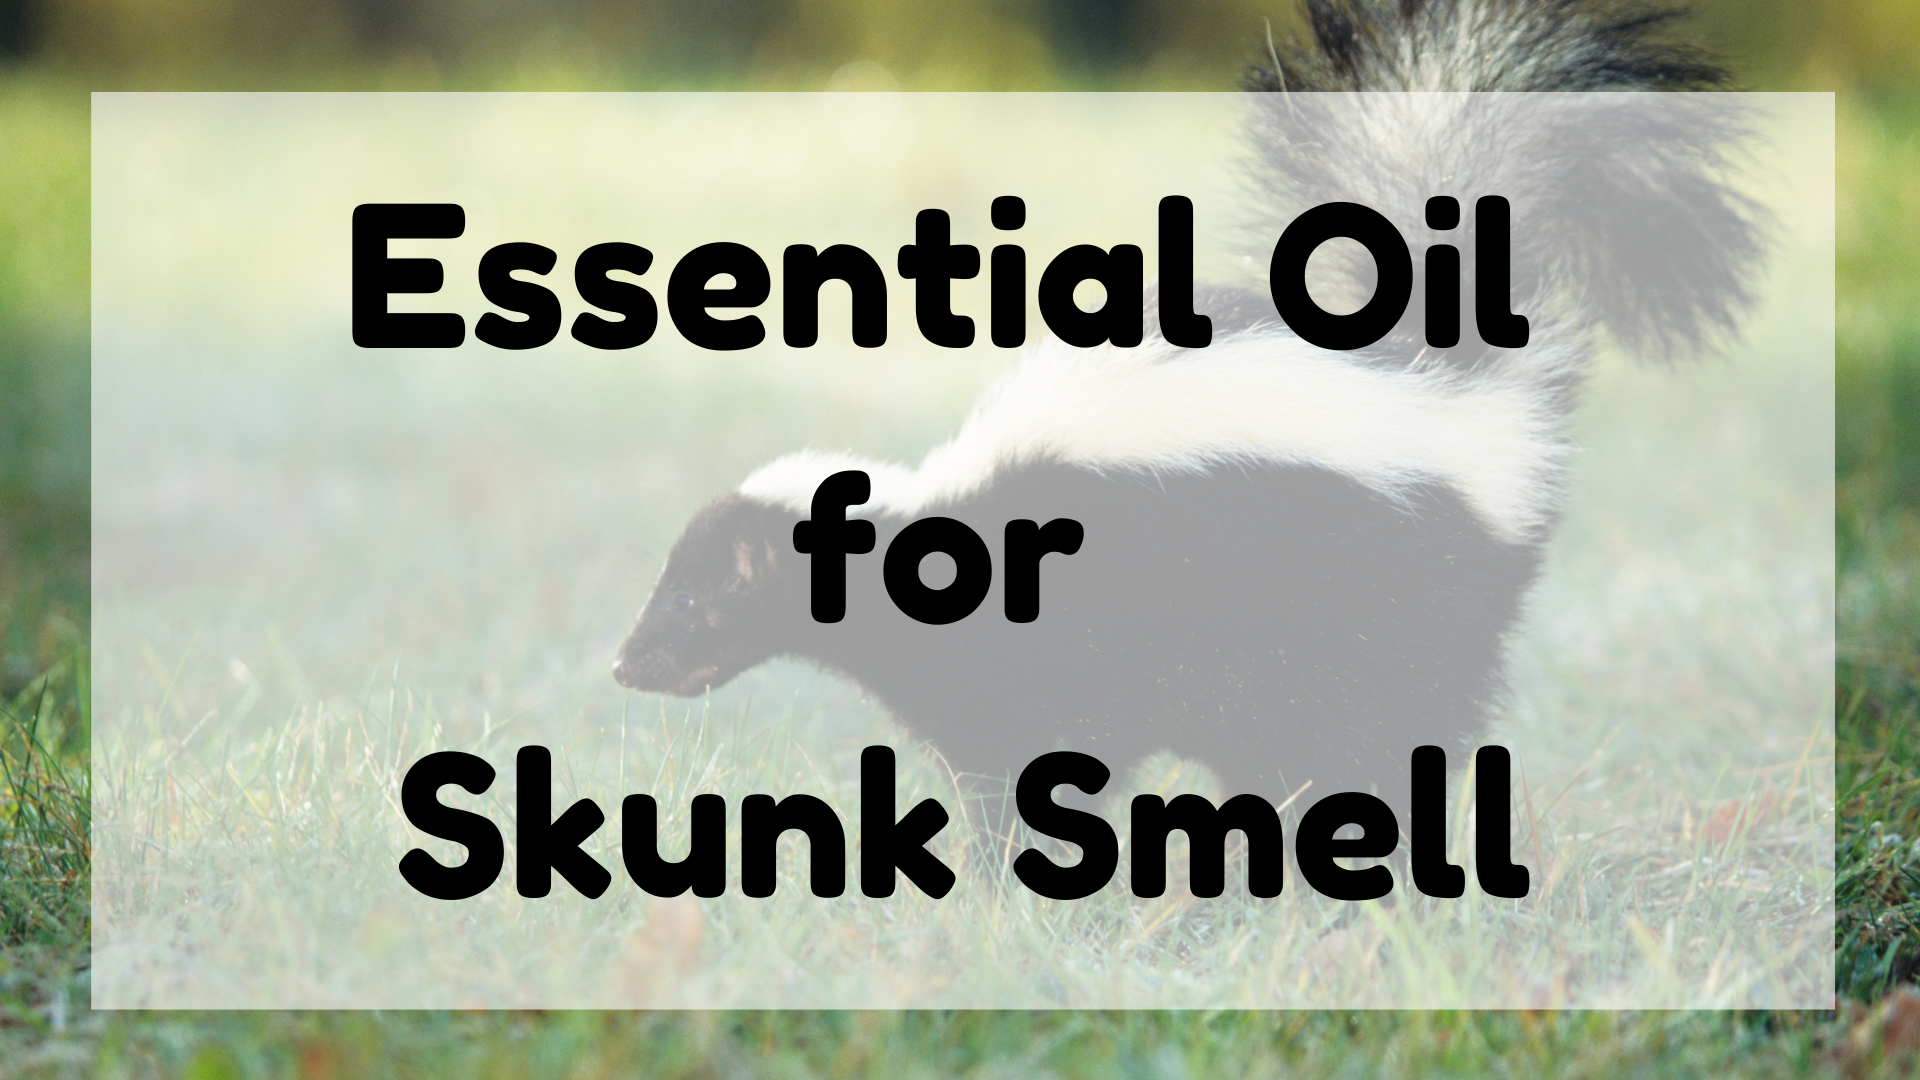 Essential Oil for Skunk Smell featured image